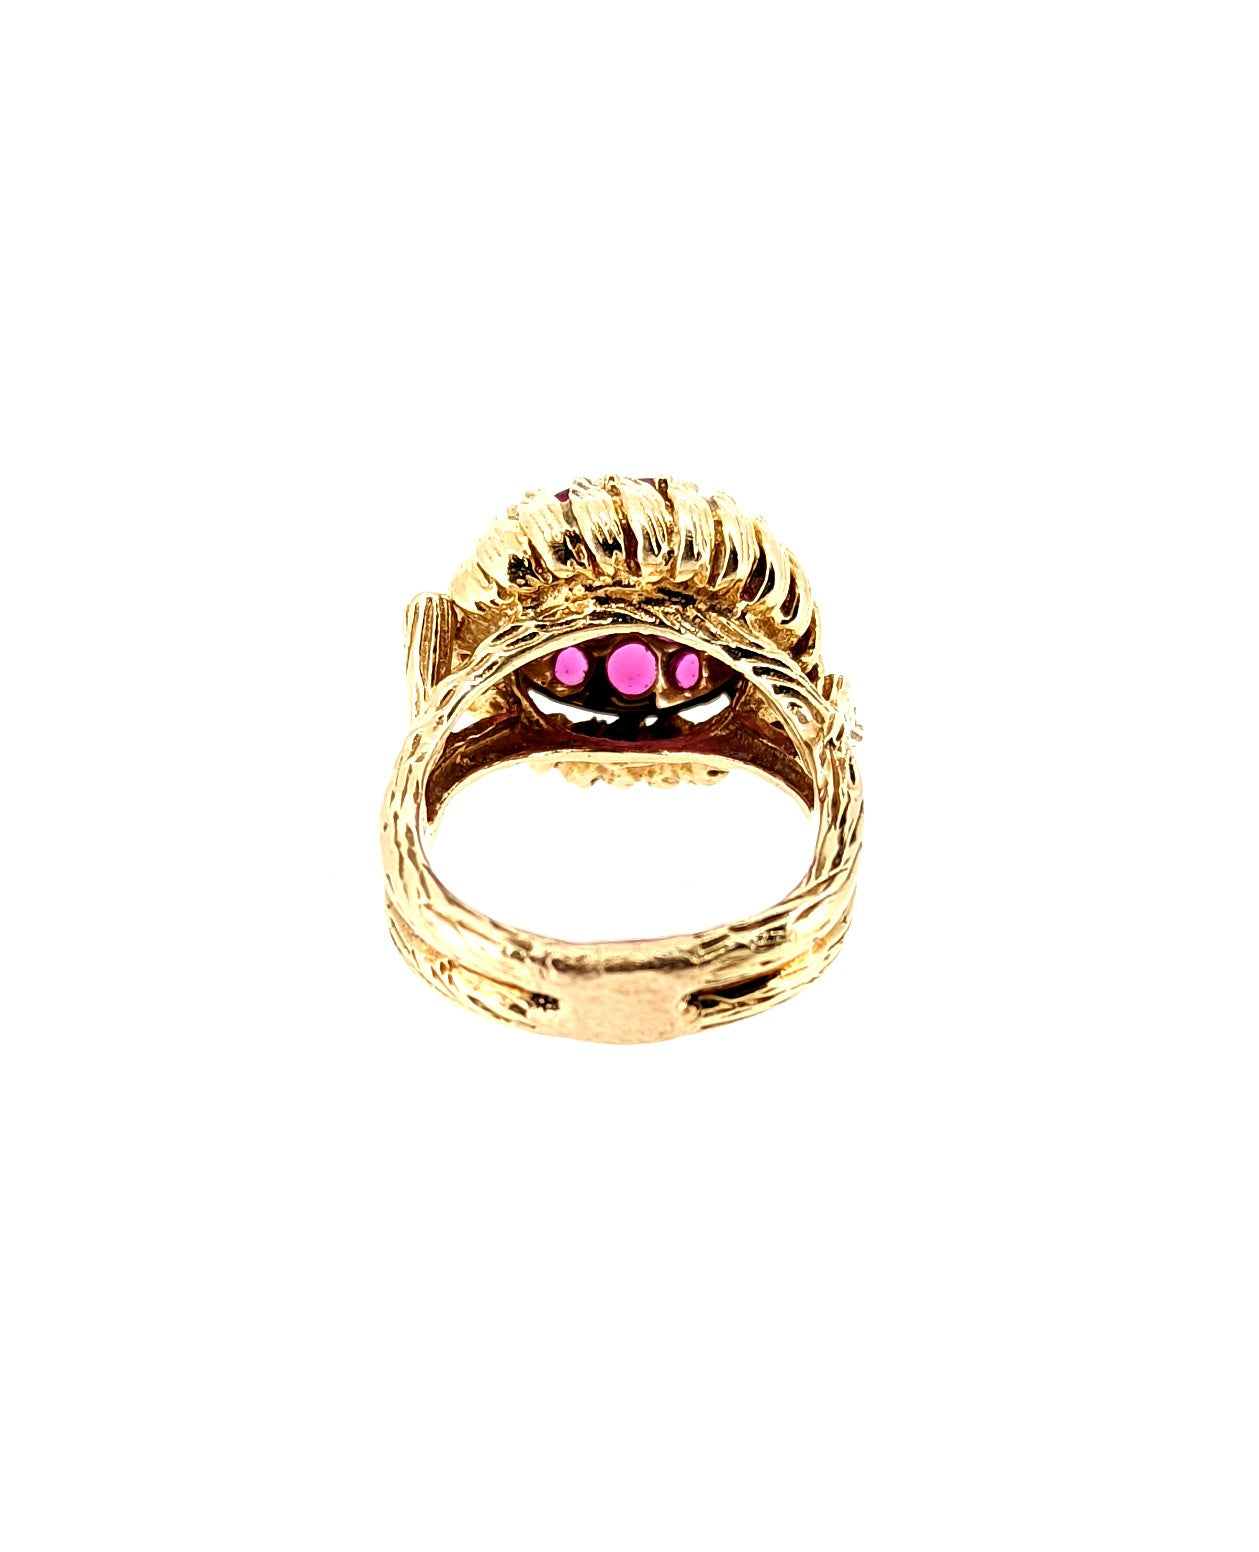 Vintage Ruby Cluster Ring in 14K Yellow Gold